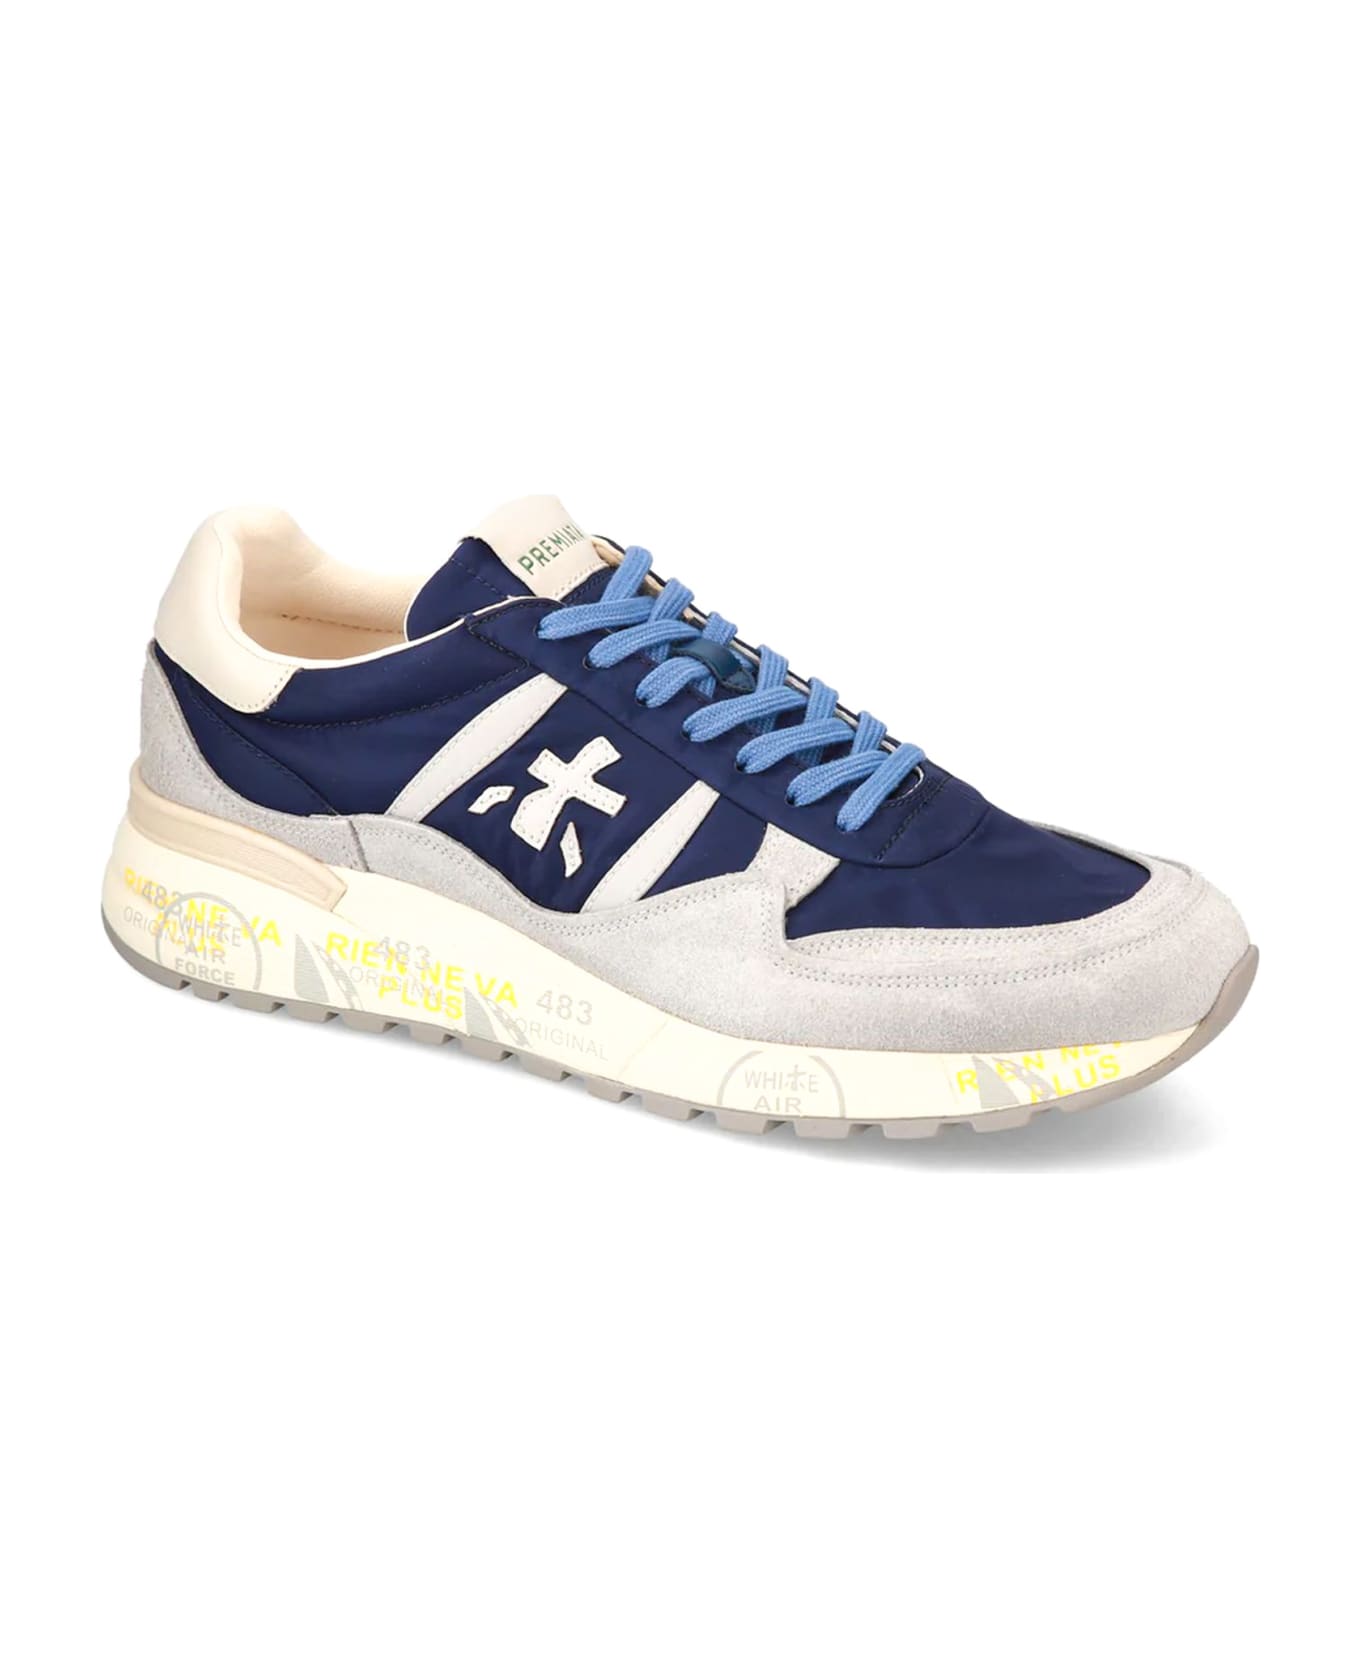 Premiata Landeck Sneakers In Blue Suede And Fabric - Blue/grey